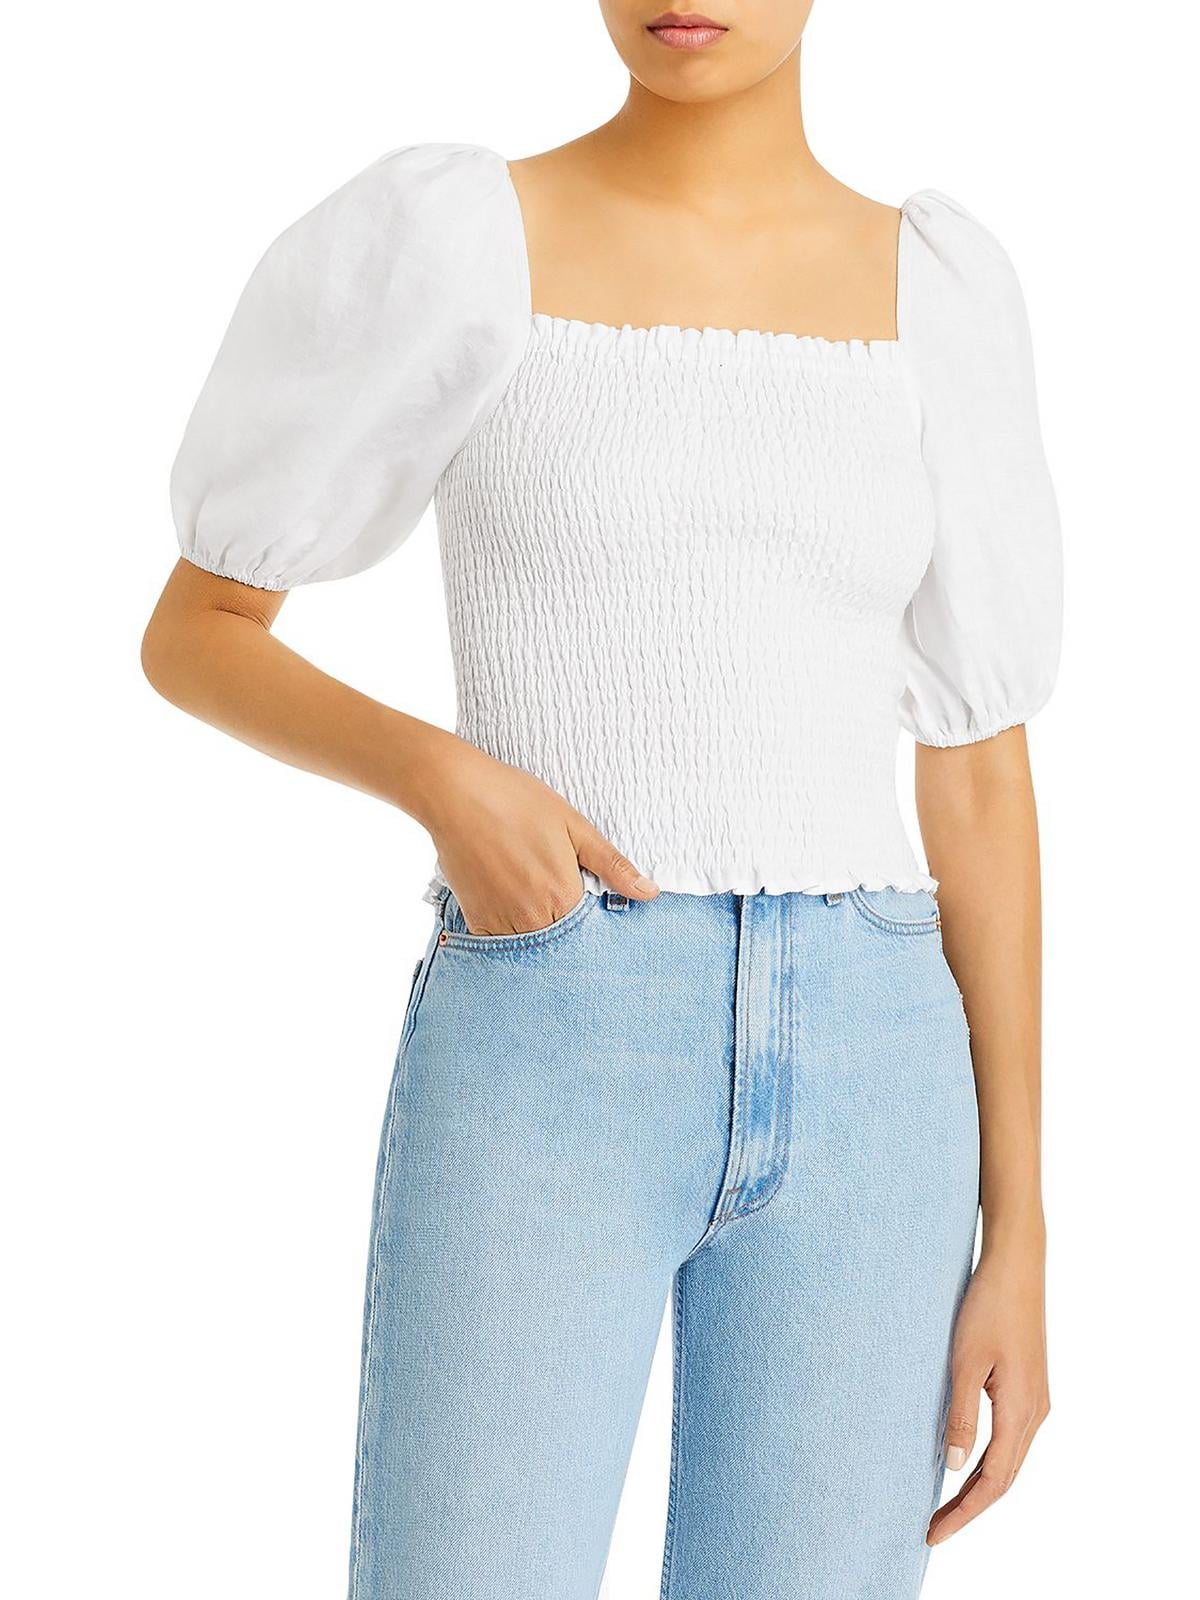 Faherty Brand Womens Frankie Linen Smocked Pullover Top